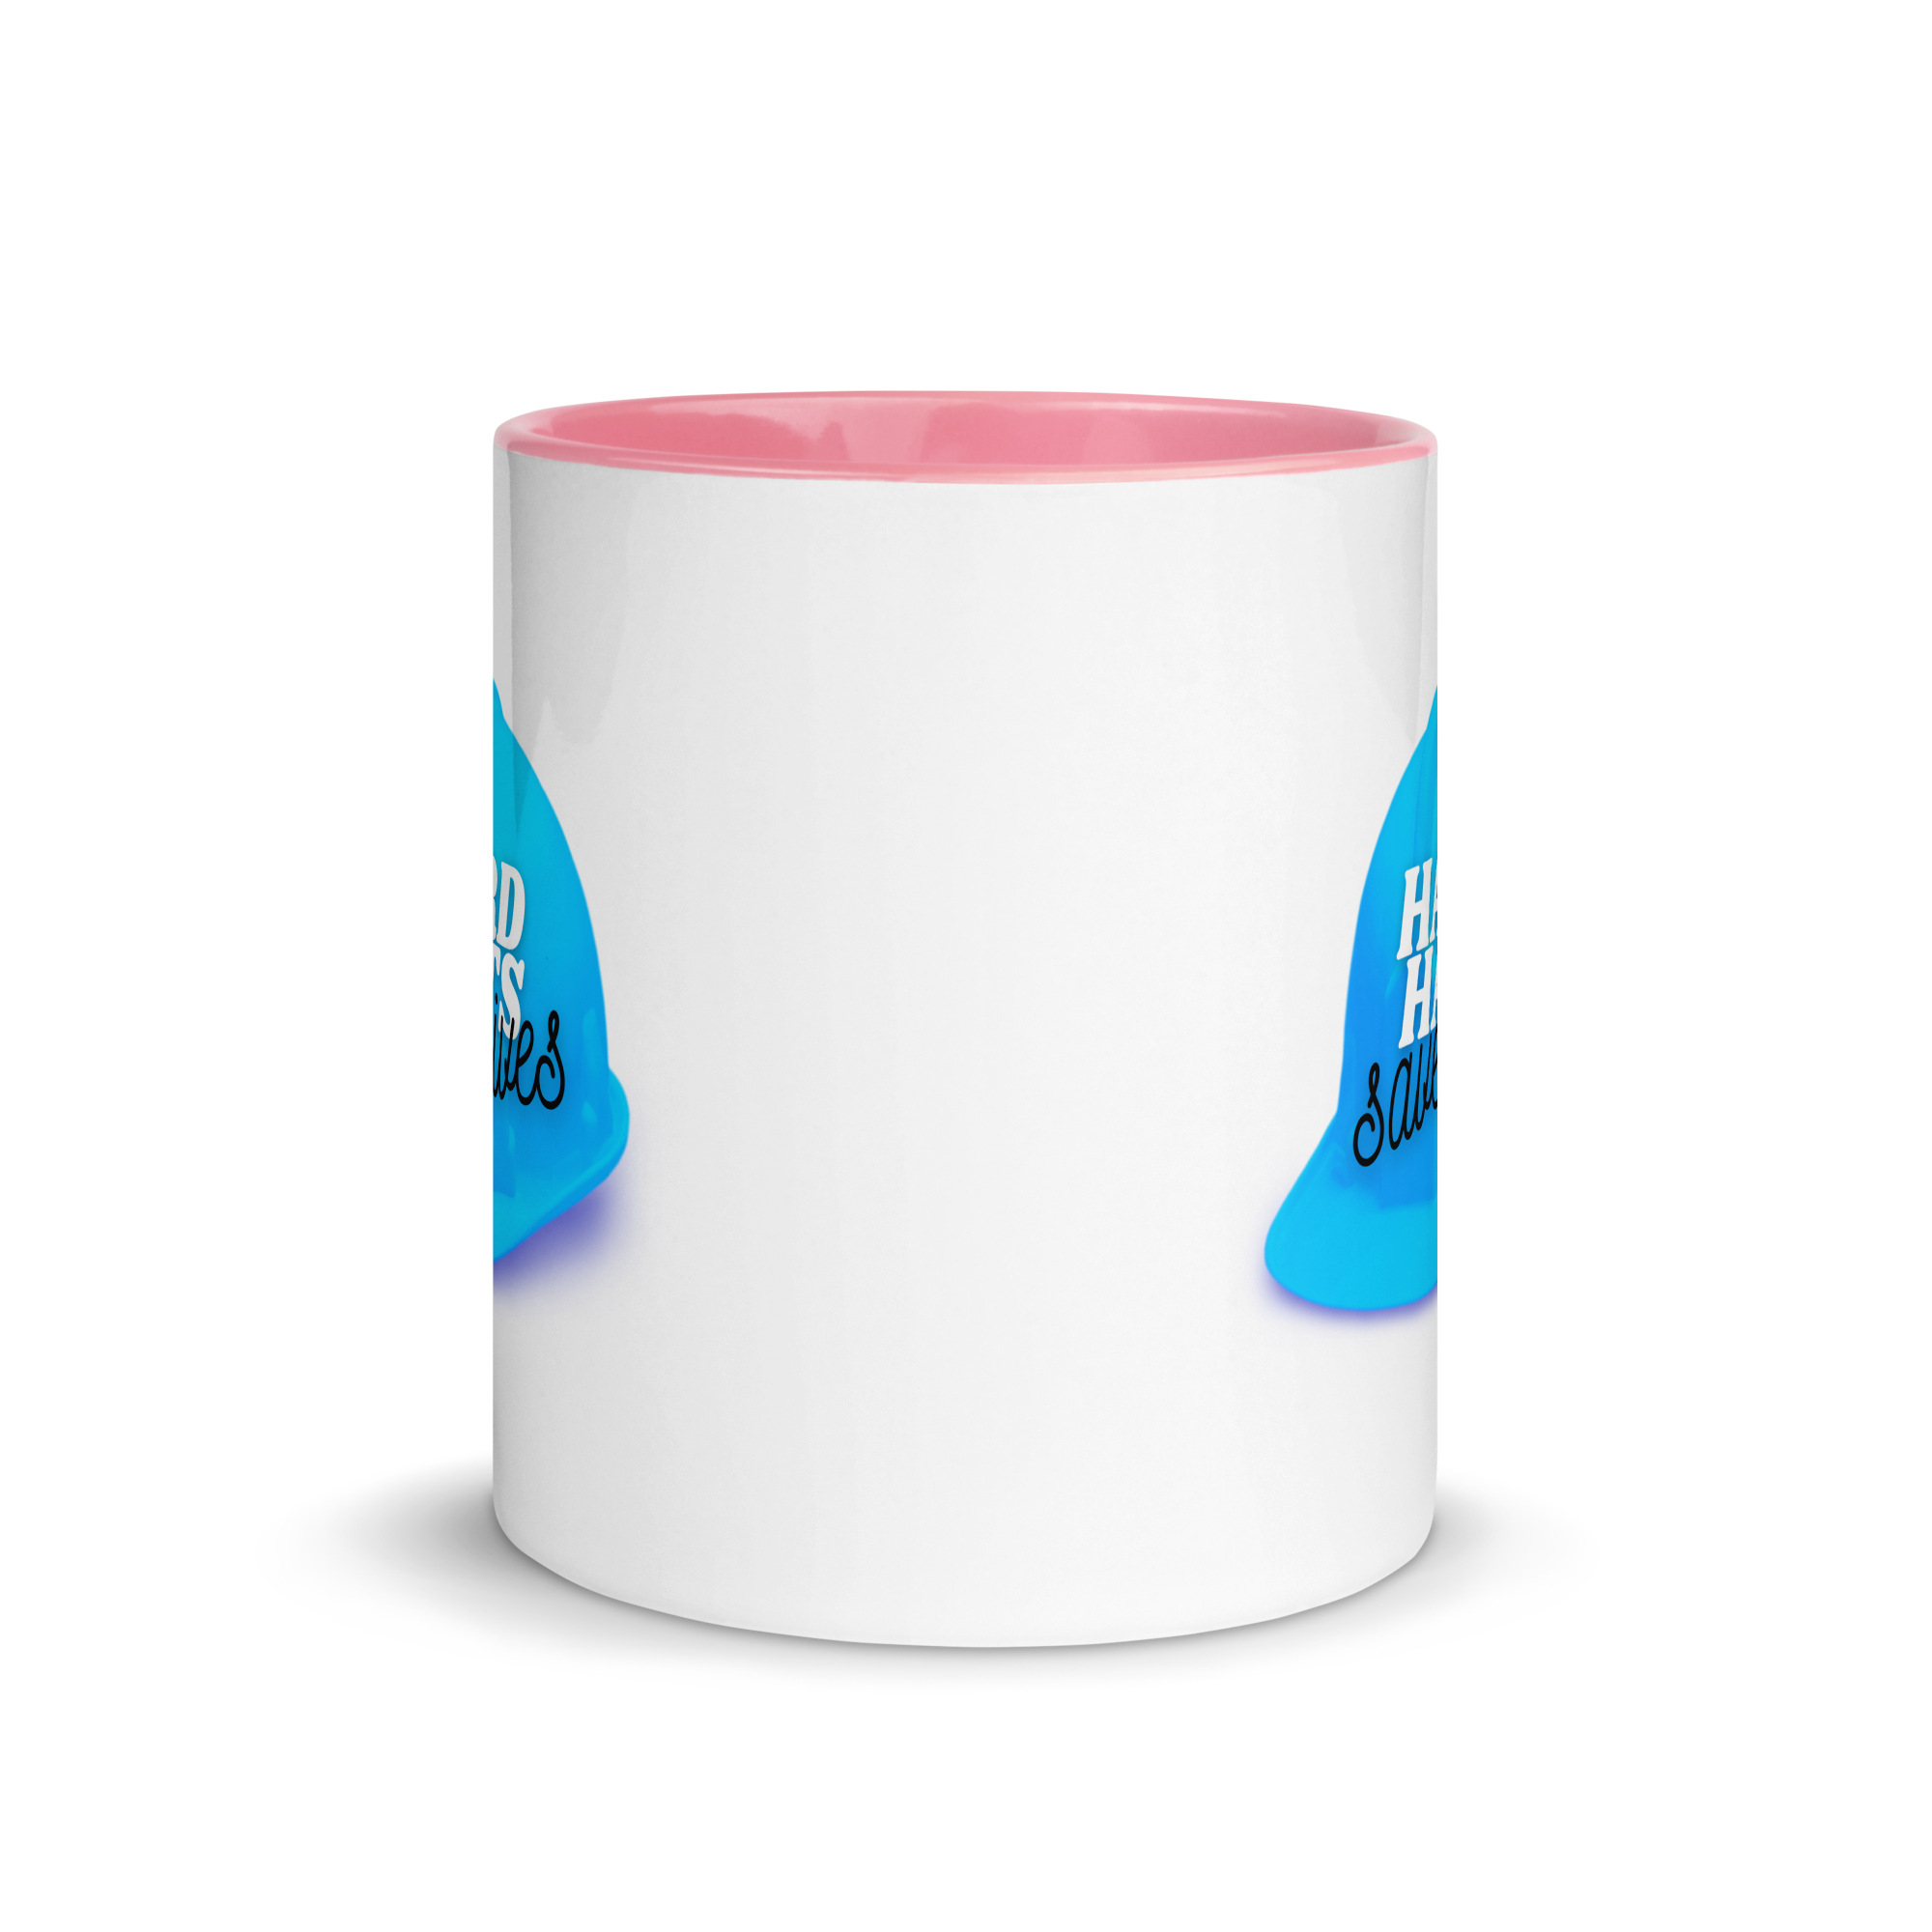 White ceramic mug with a blue hard hat with text that says "Hard hats save lives" with a pink rim, inside, and handle.